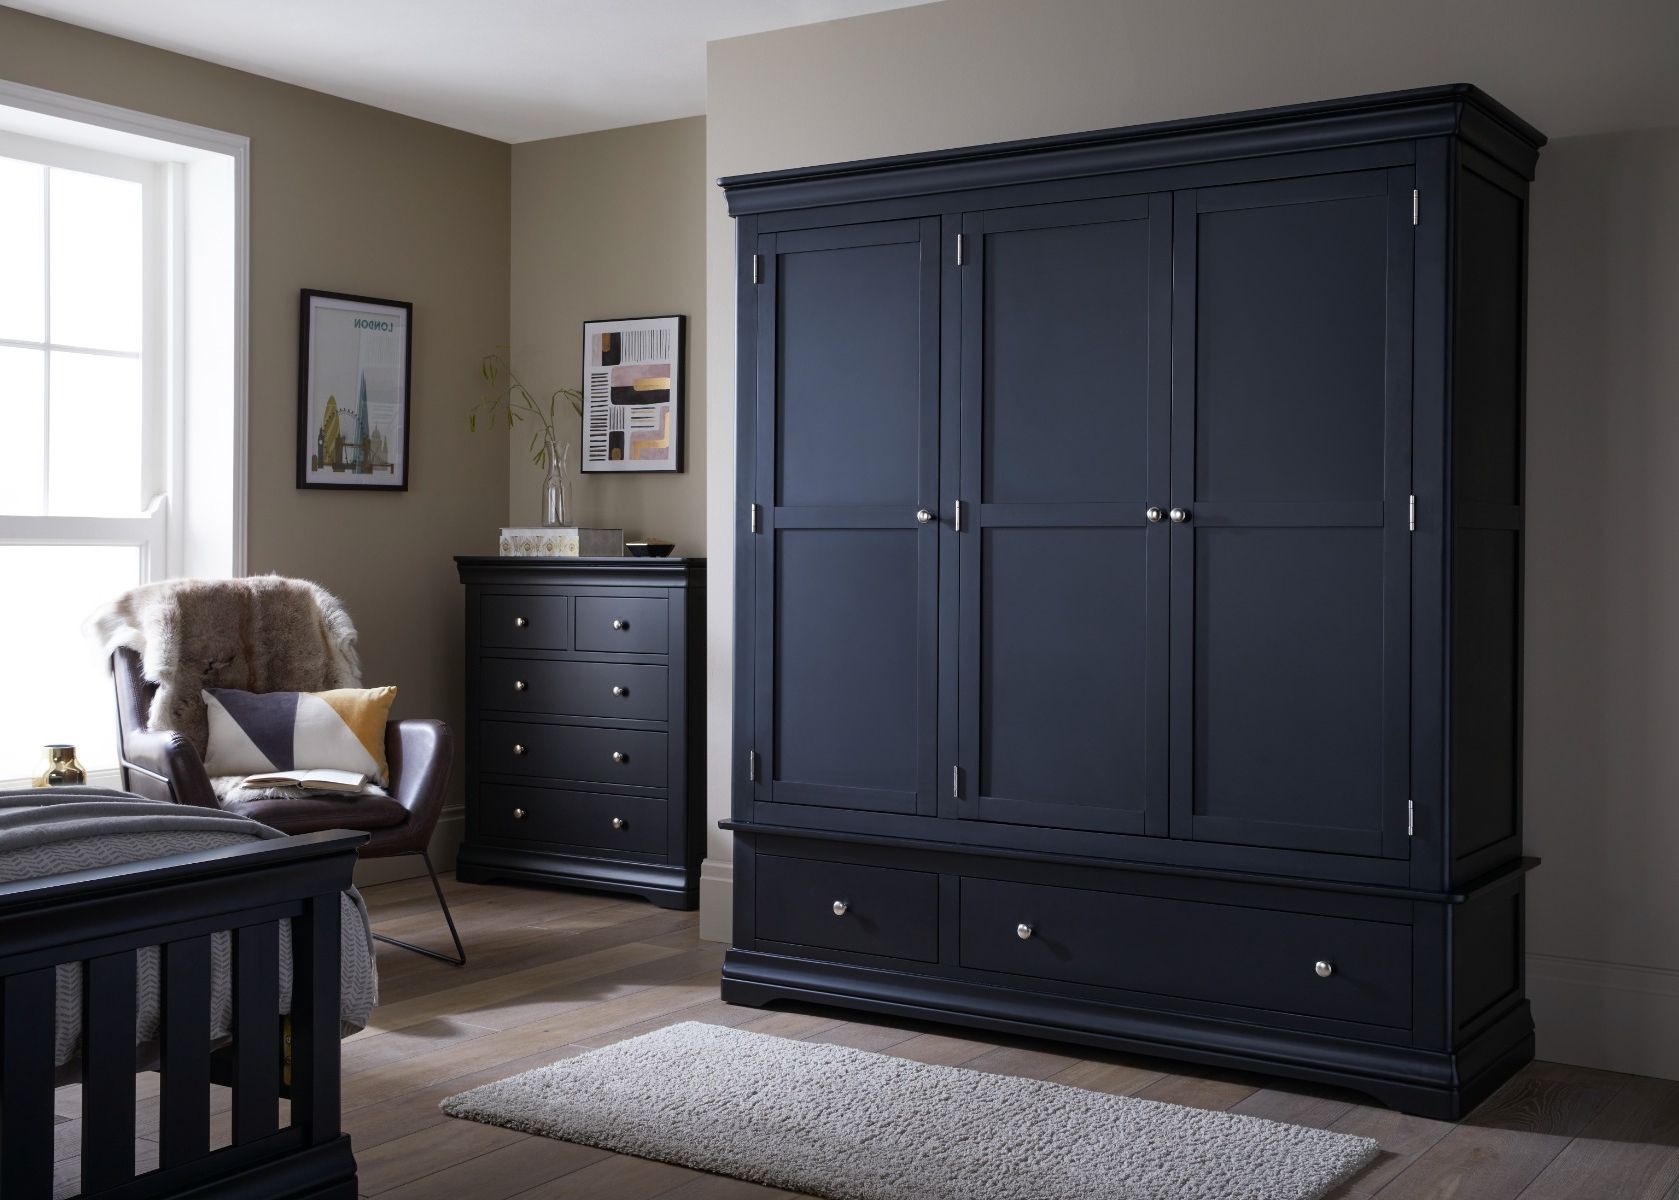 Toulouse Black Painted Large Triple Wardrobe With Drawer Throughout Black Wood Wardrobes (View 14 of 20)